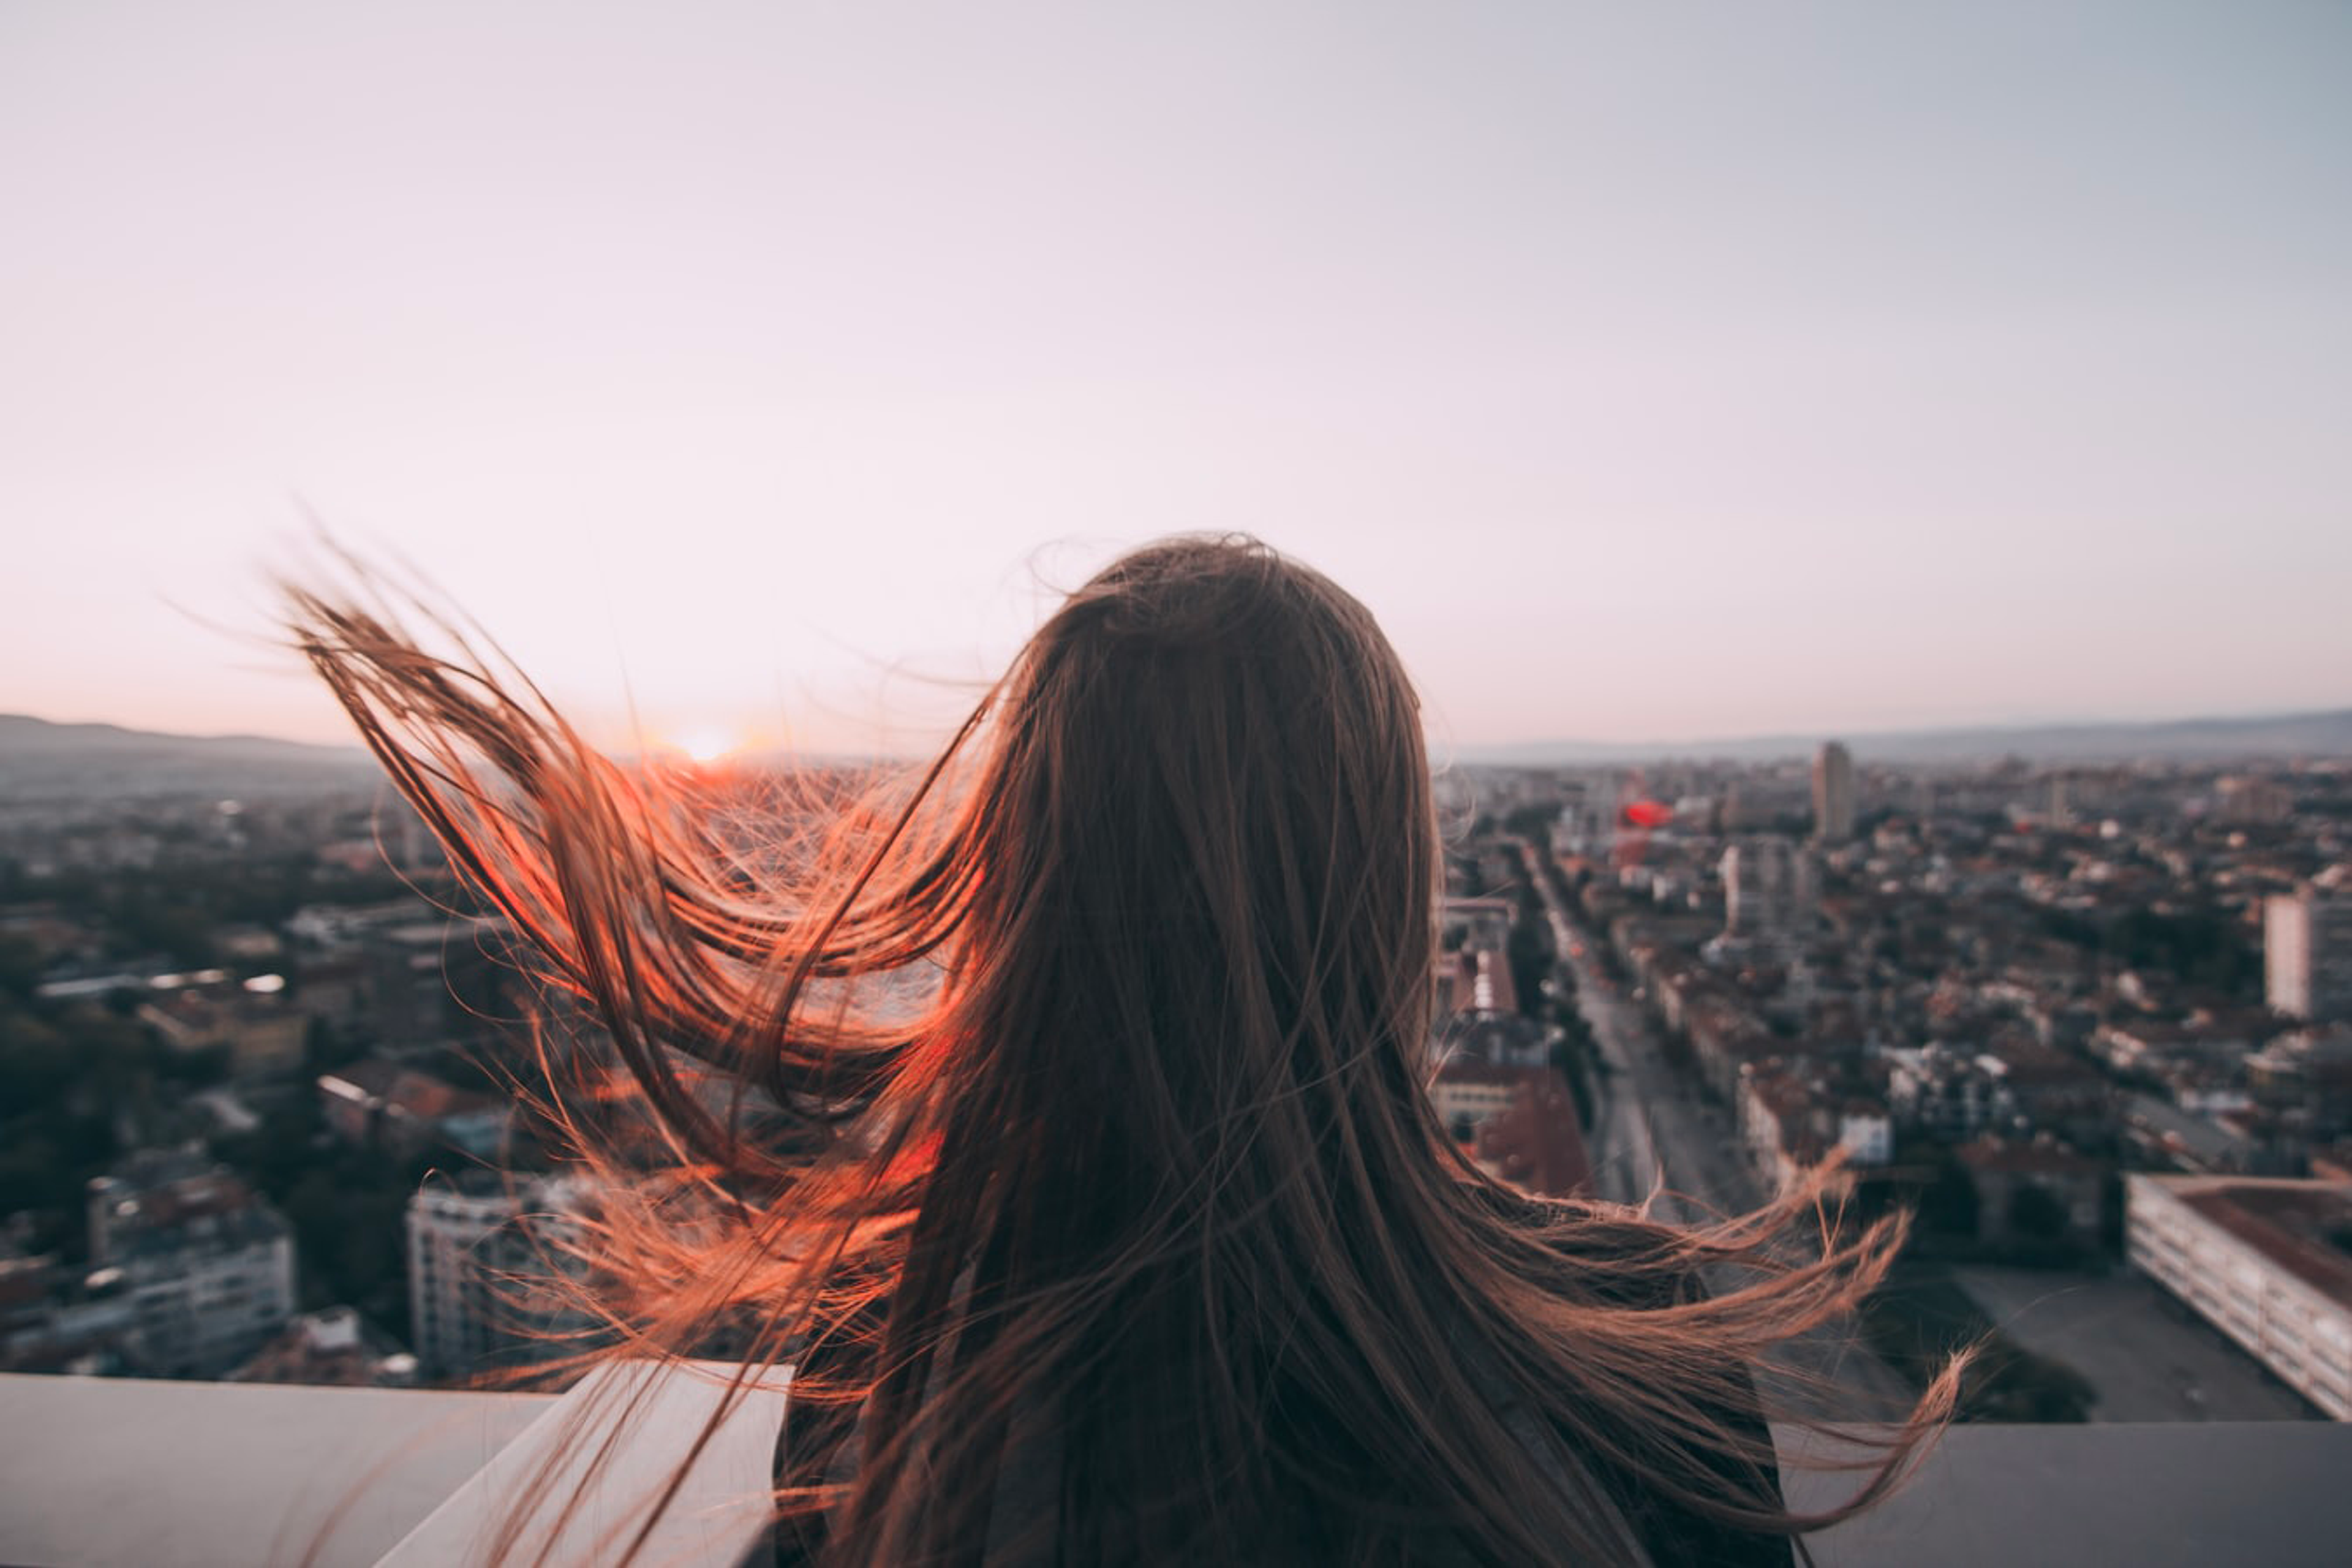 Person with long hair in the wind looking over the city